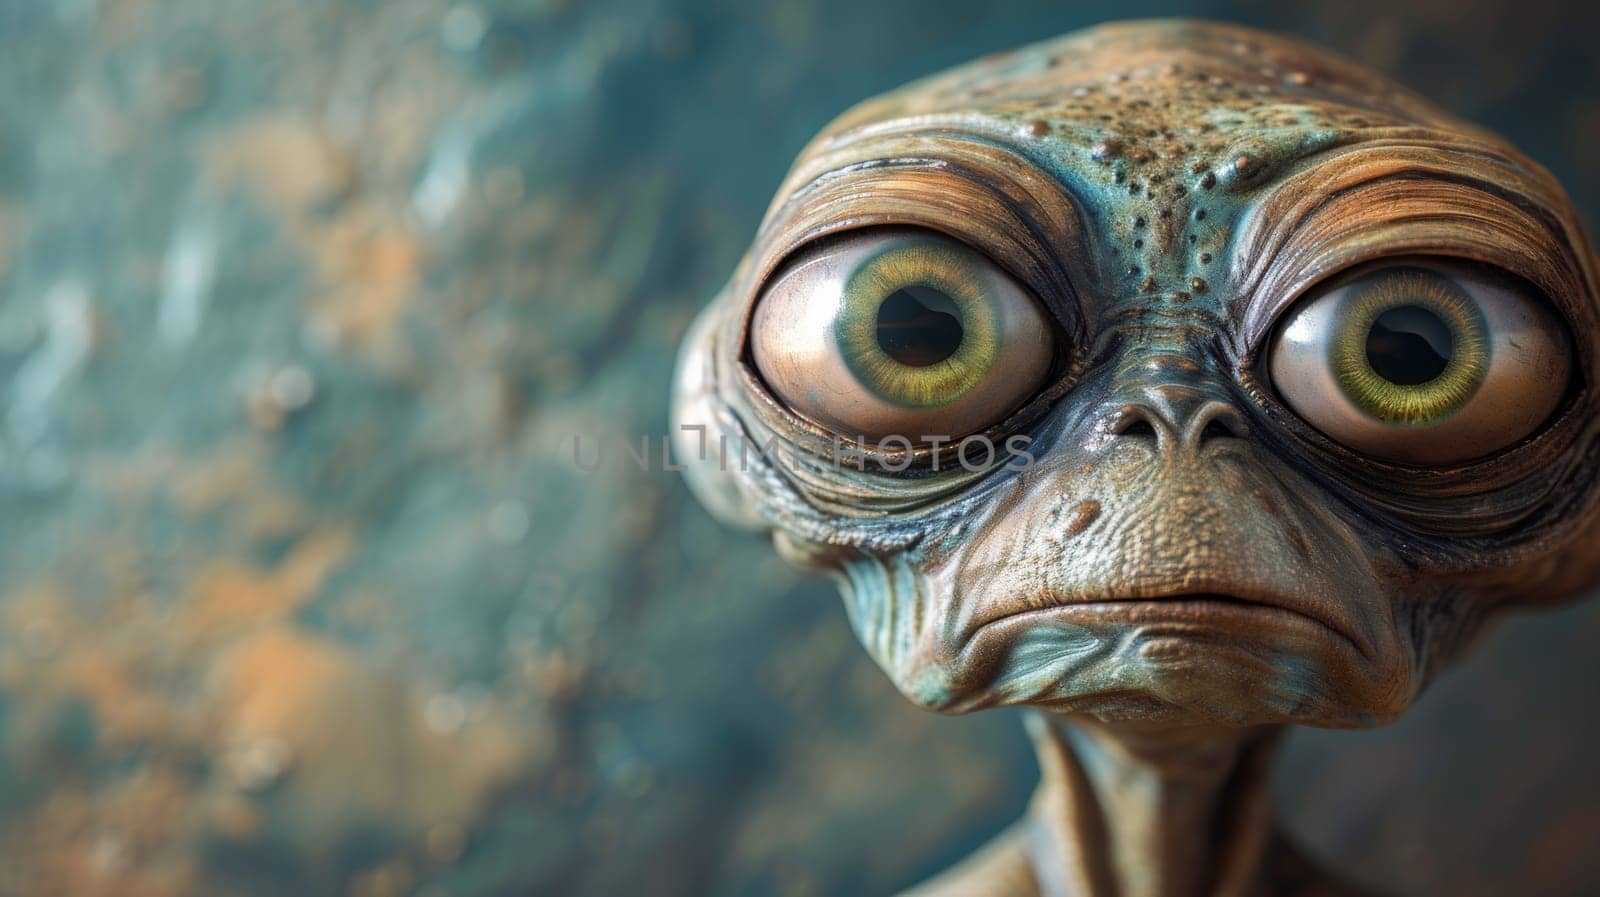 A close up of a creepy looking alien with big eyes